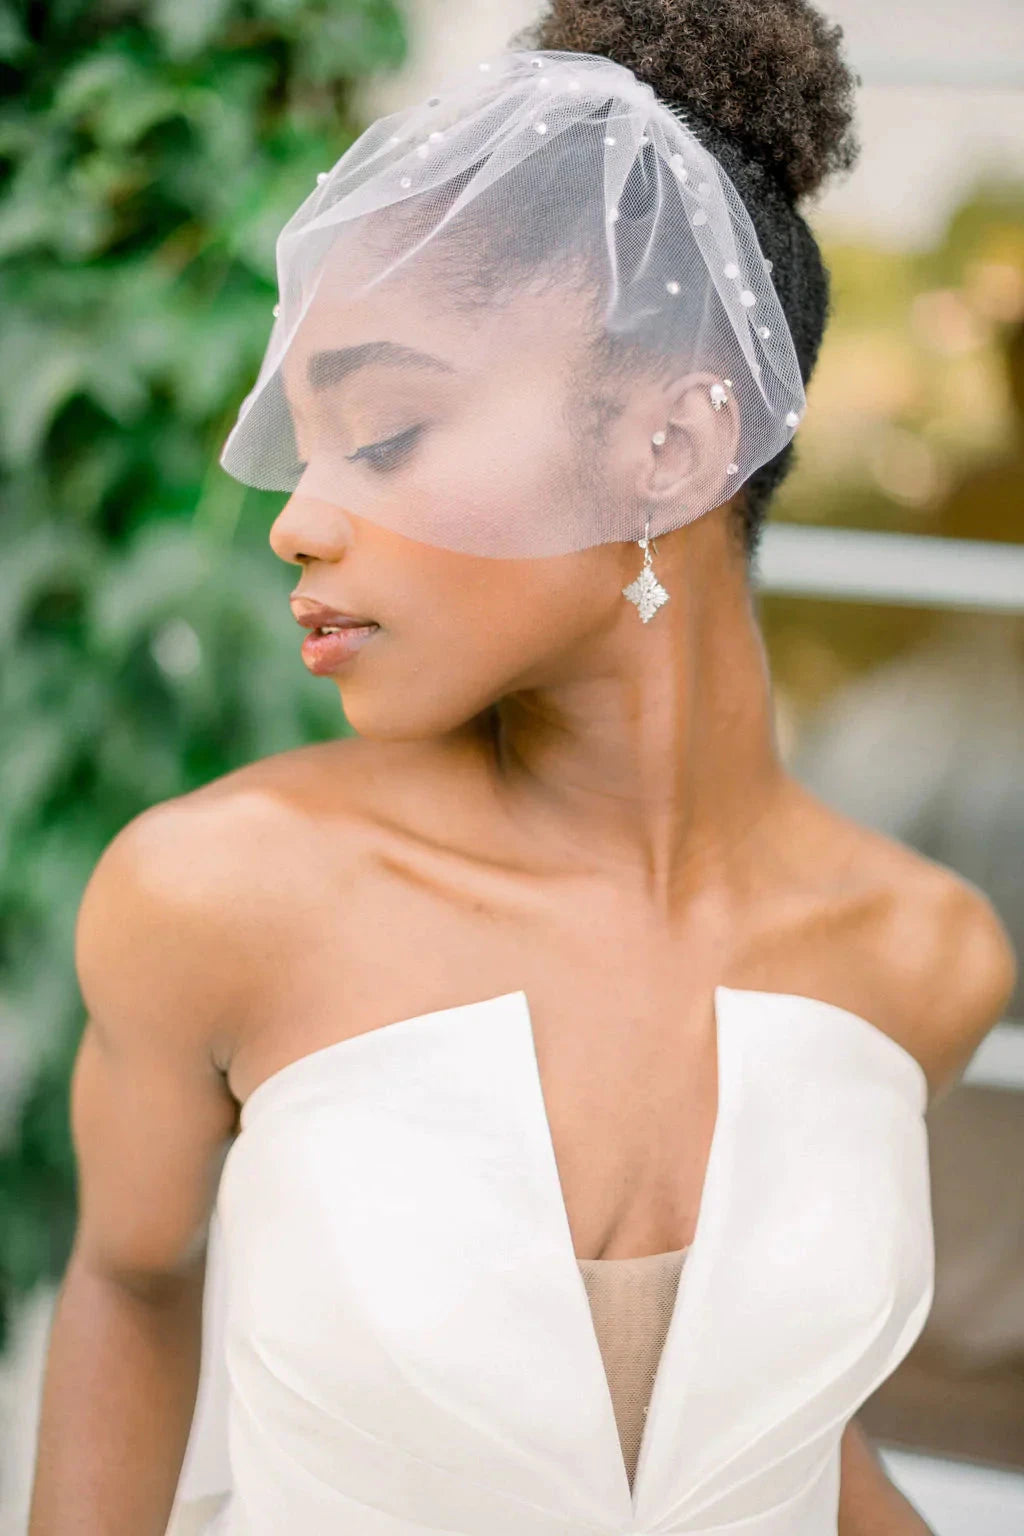 Mini Tulle birdcage veil with crystal pearl accents  - ready to ship Tessa Kim